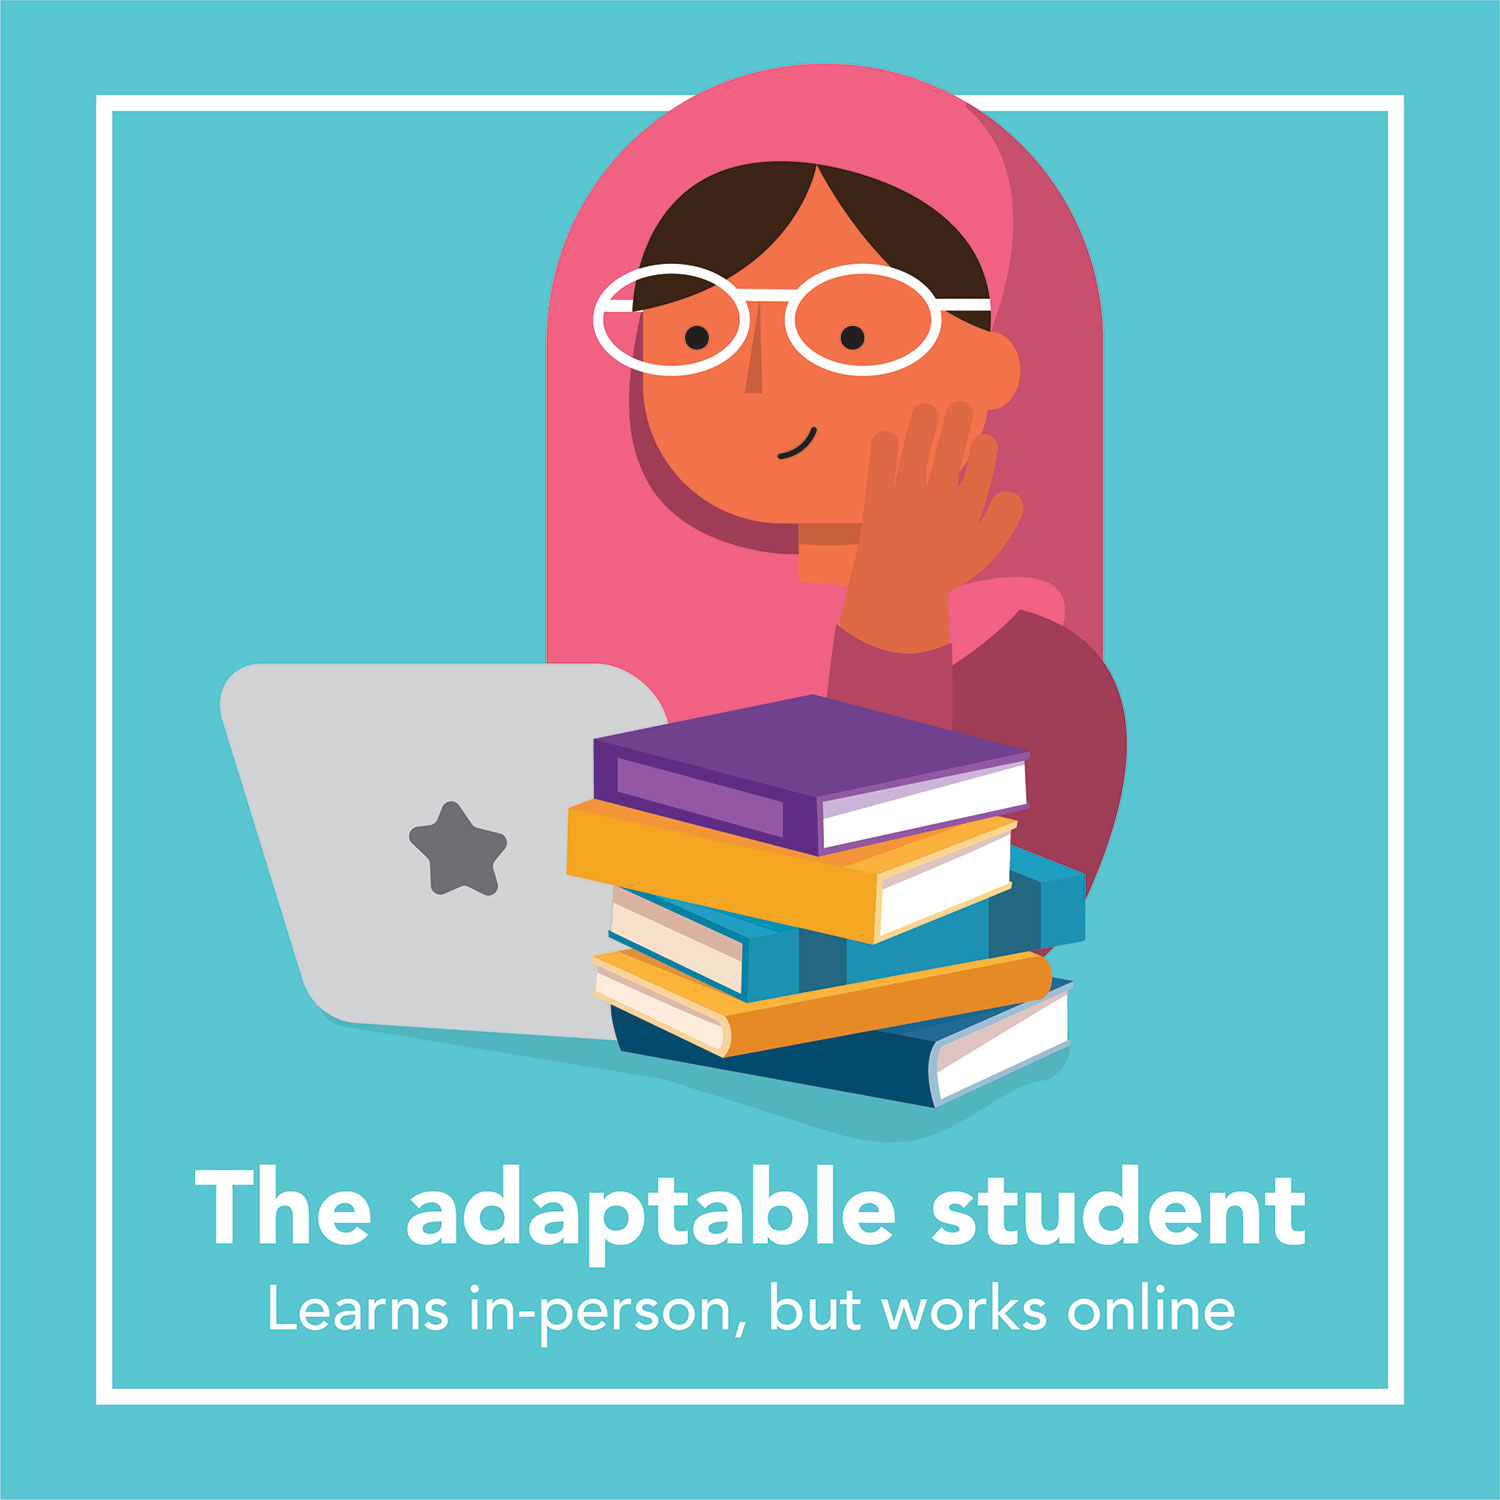 the adaptable student - learns in-person, but works online